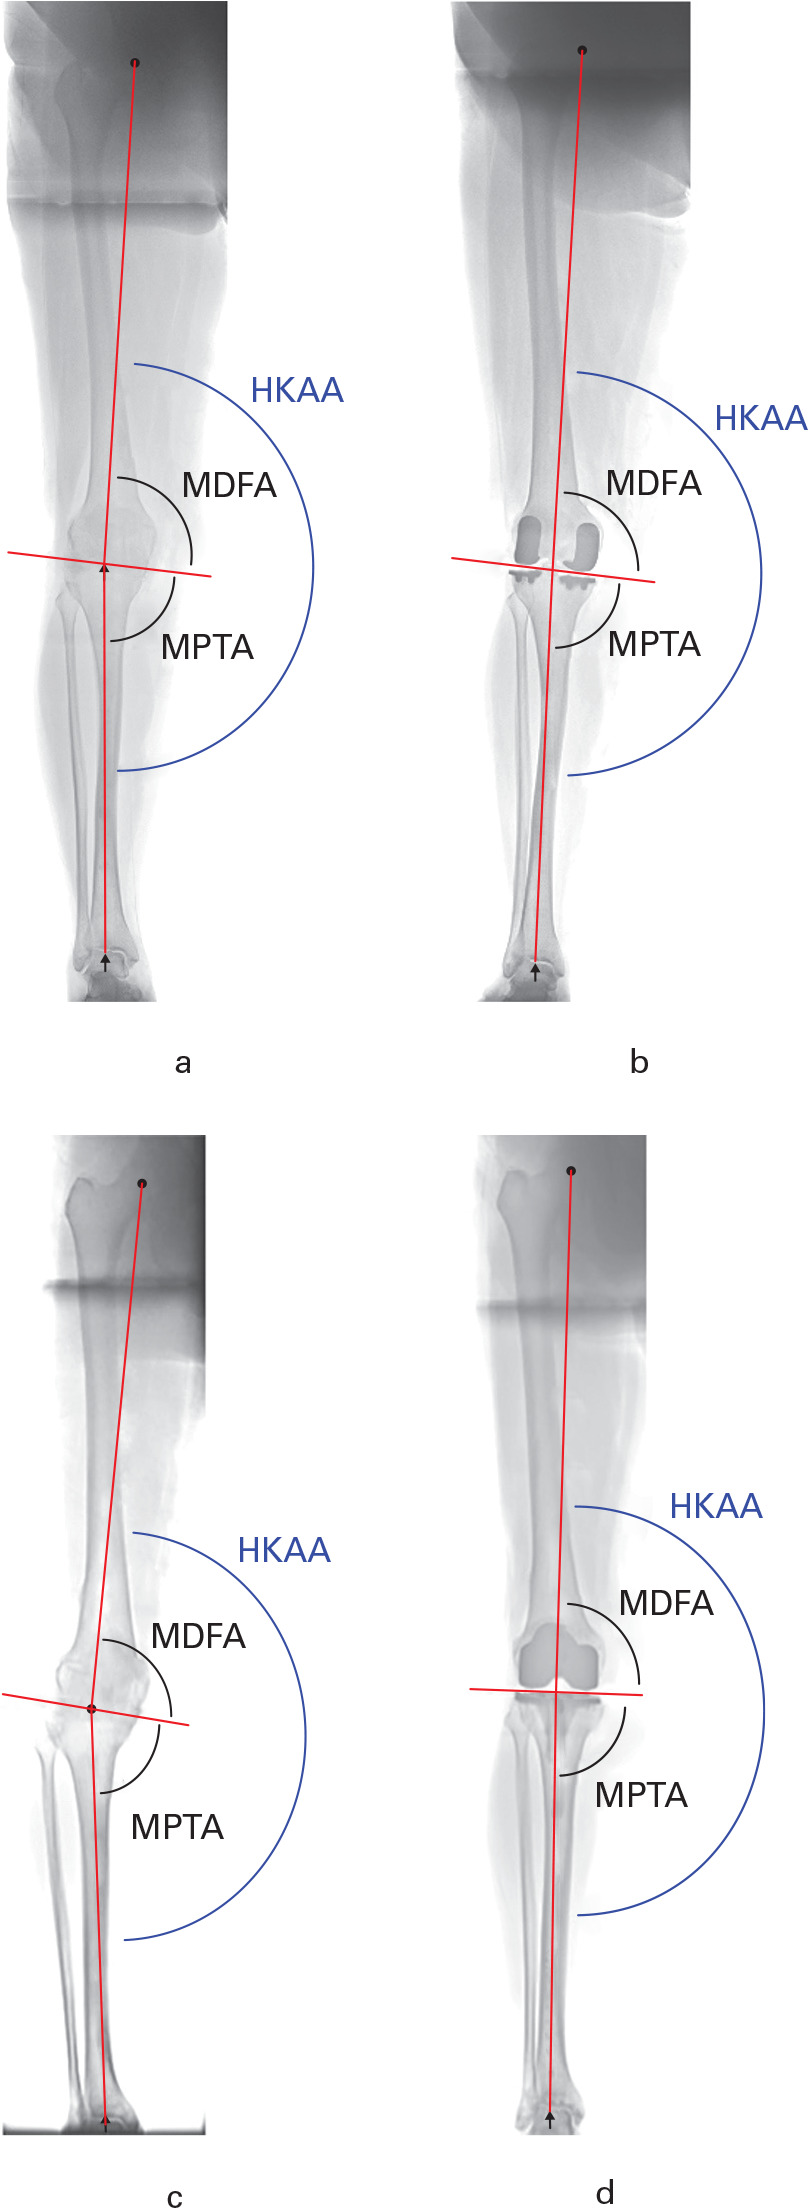 Fig. 6 
          a) Pre- and b) postoperative long-leg standing radiographs showing correction of hip-knee-ankle angle (HKAA), while the obliquity of the joint line is maintained, following bi-unicompartmental knee arthroplasty. c) Pre- and d) postoperative long-leg standing radiographs showing correction of HKAA and alteration of the obliquity of the joint line following total knee arthroplasty.
        